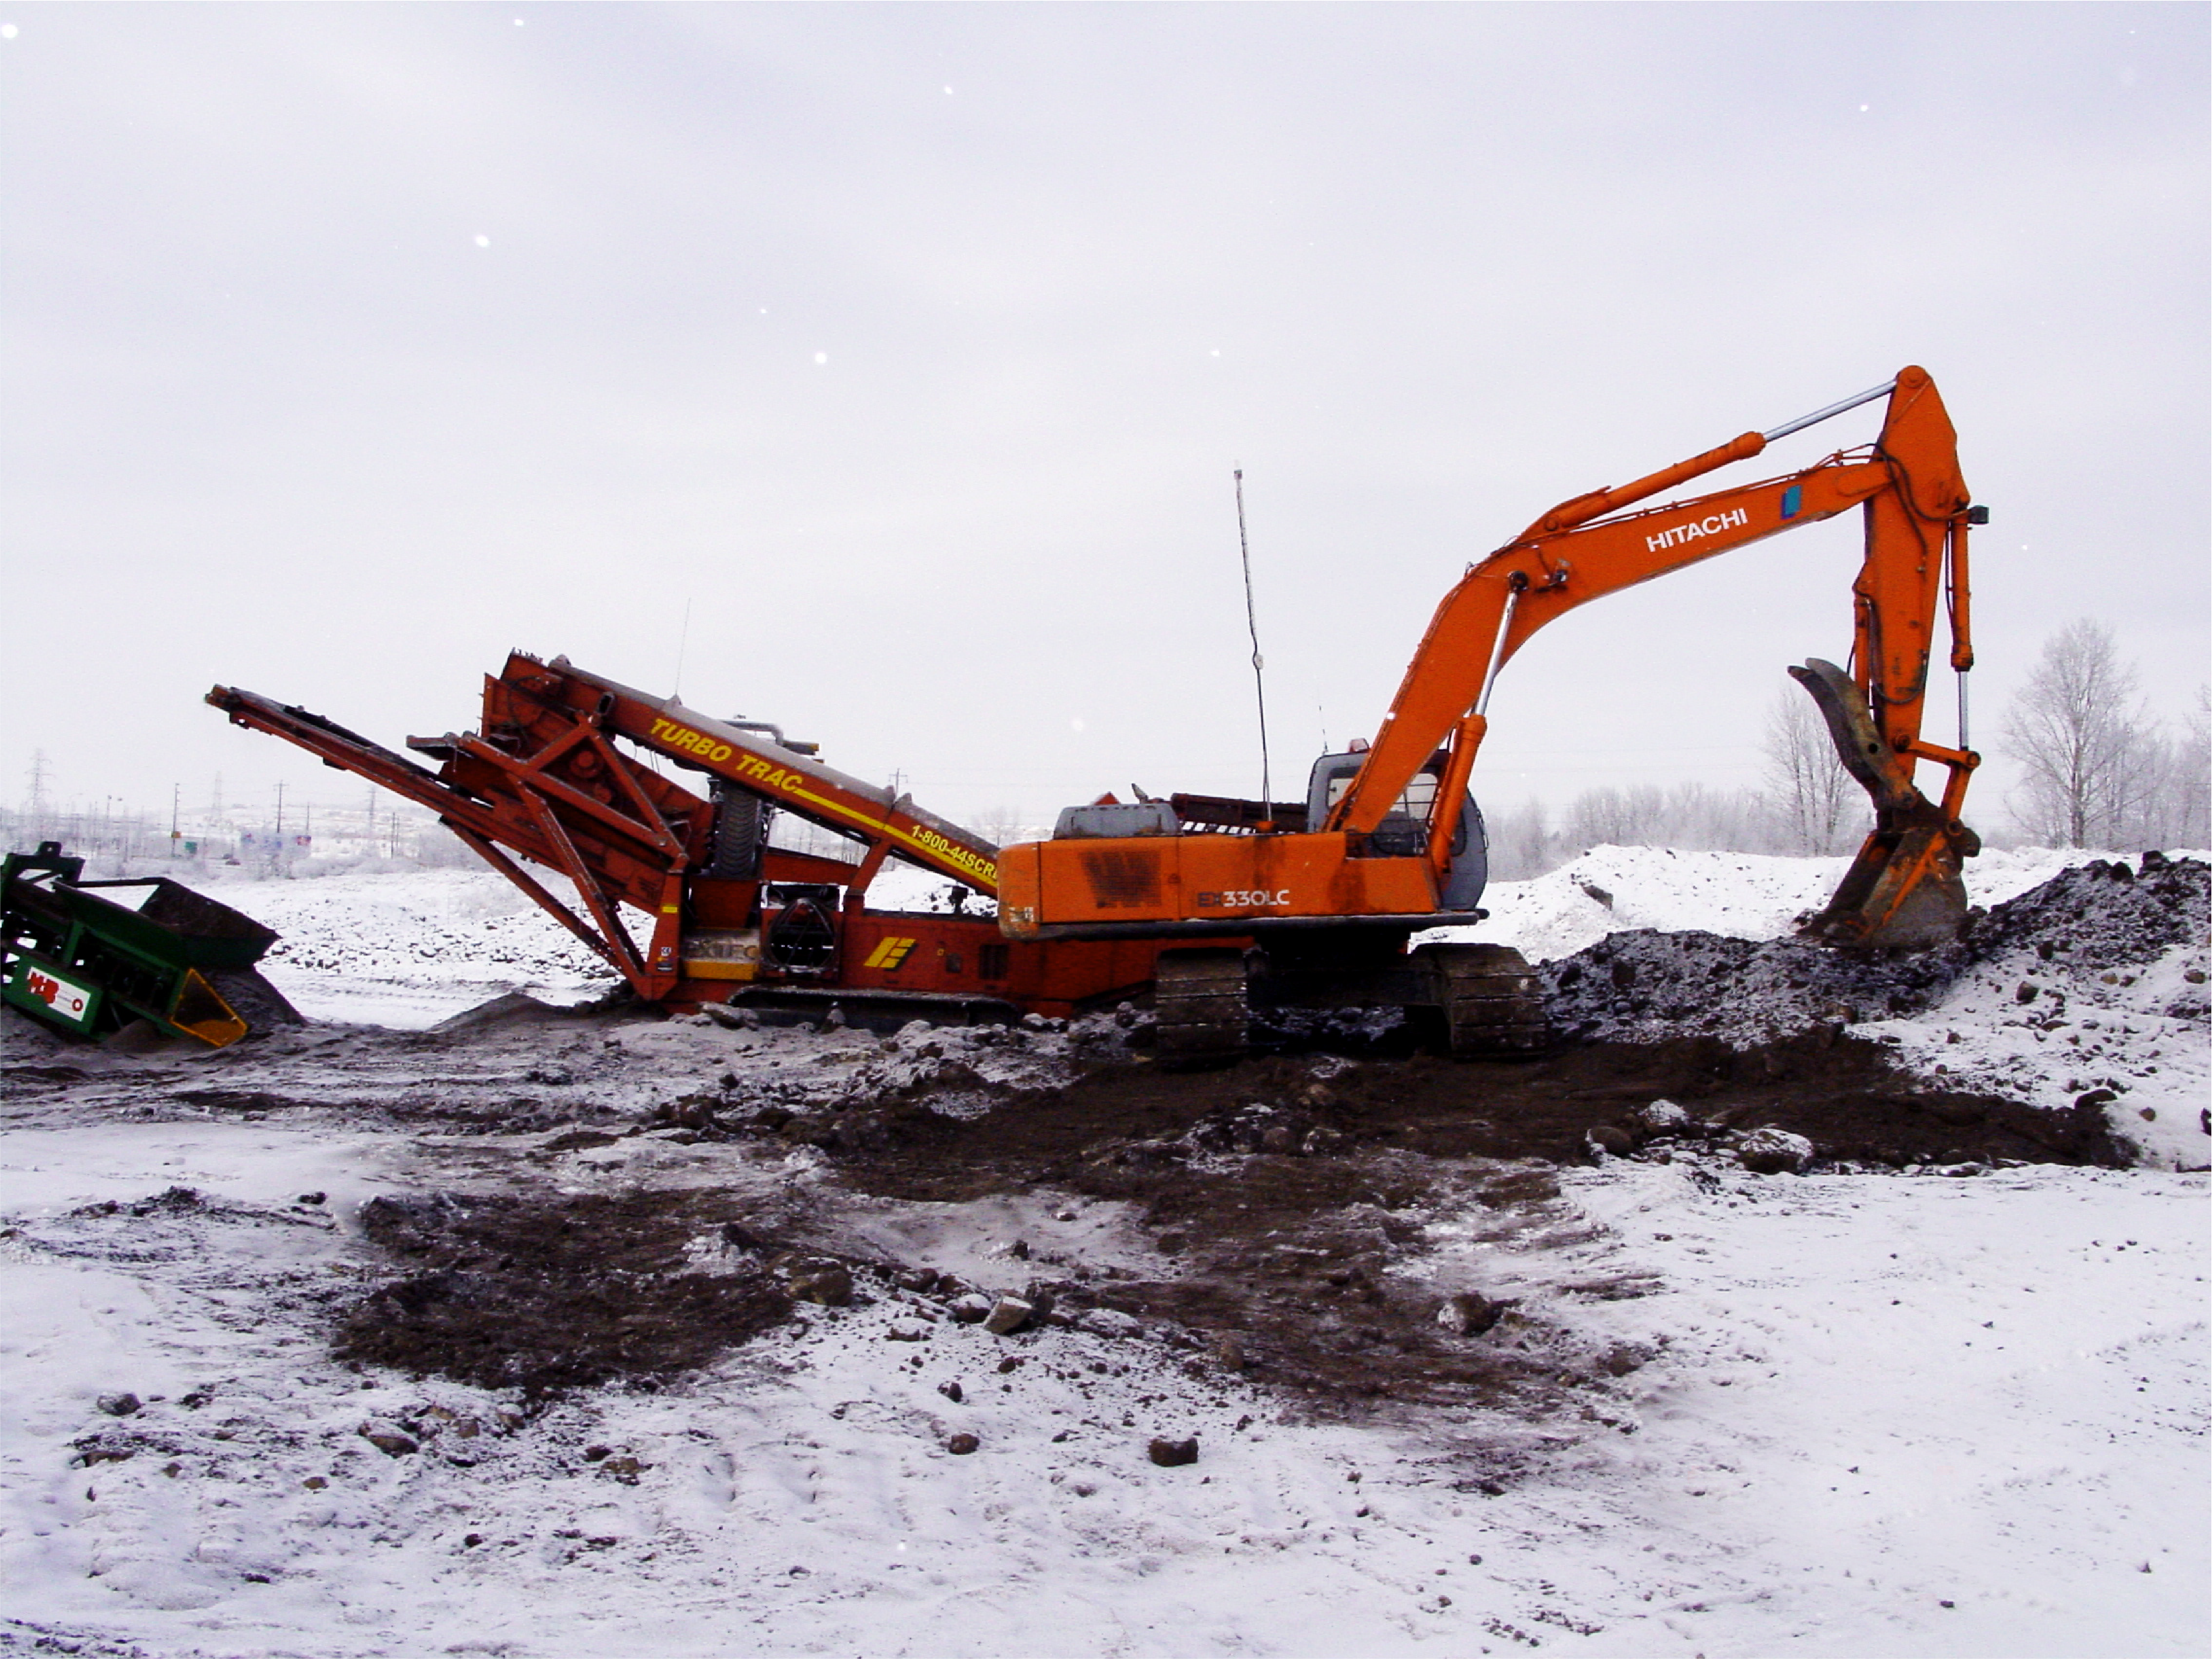 An Orange Hitachi Excavator operates in the snow to dig up soil